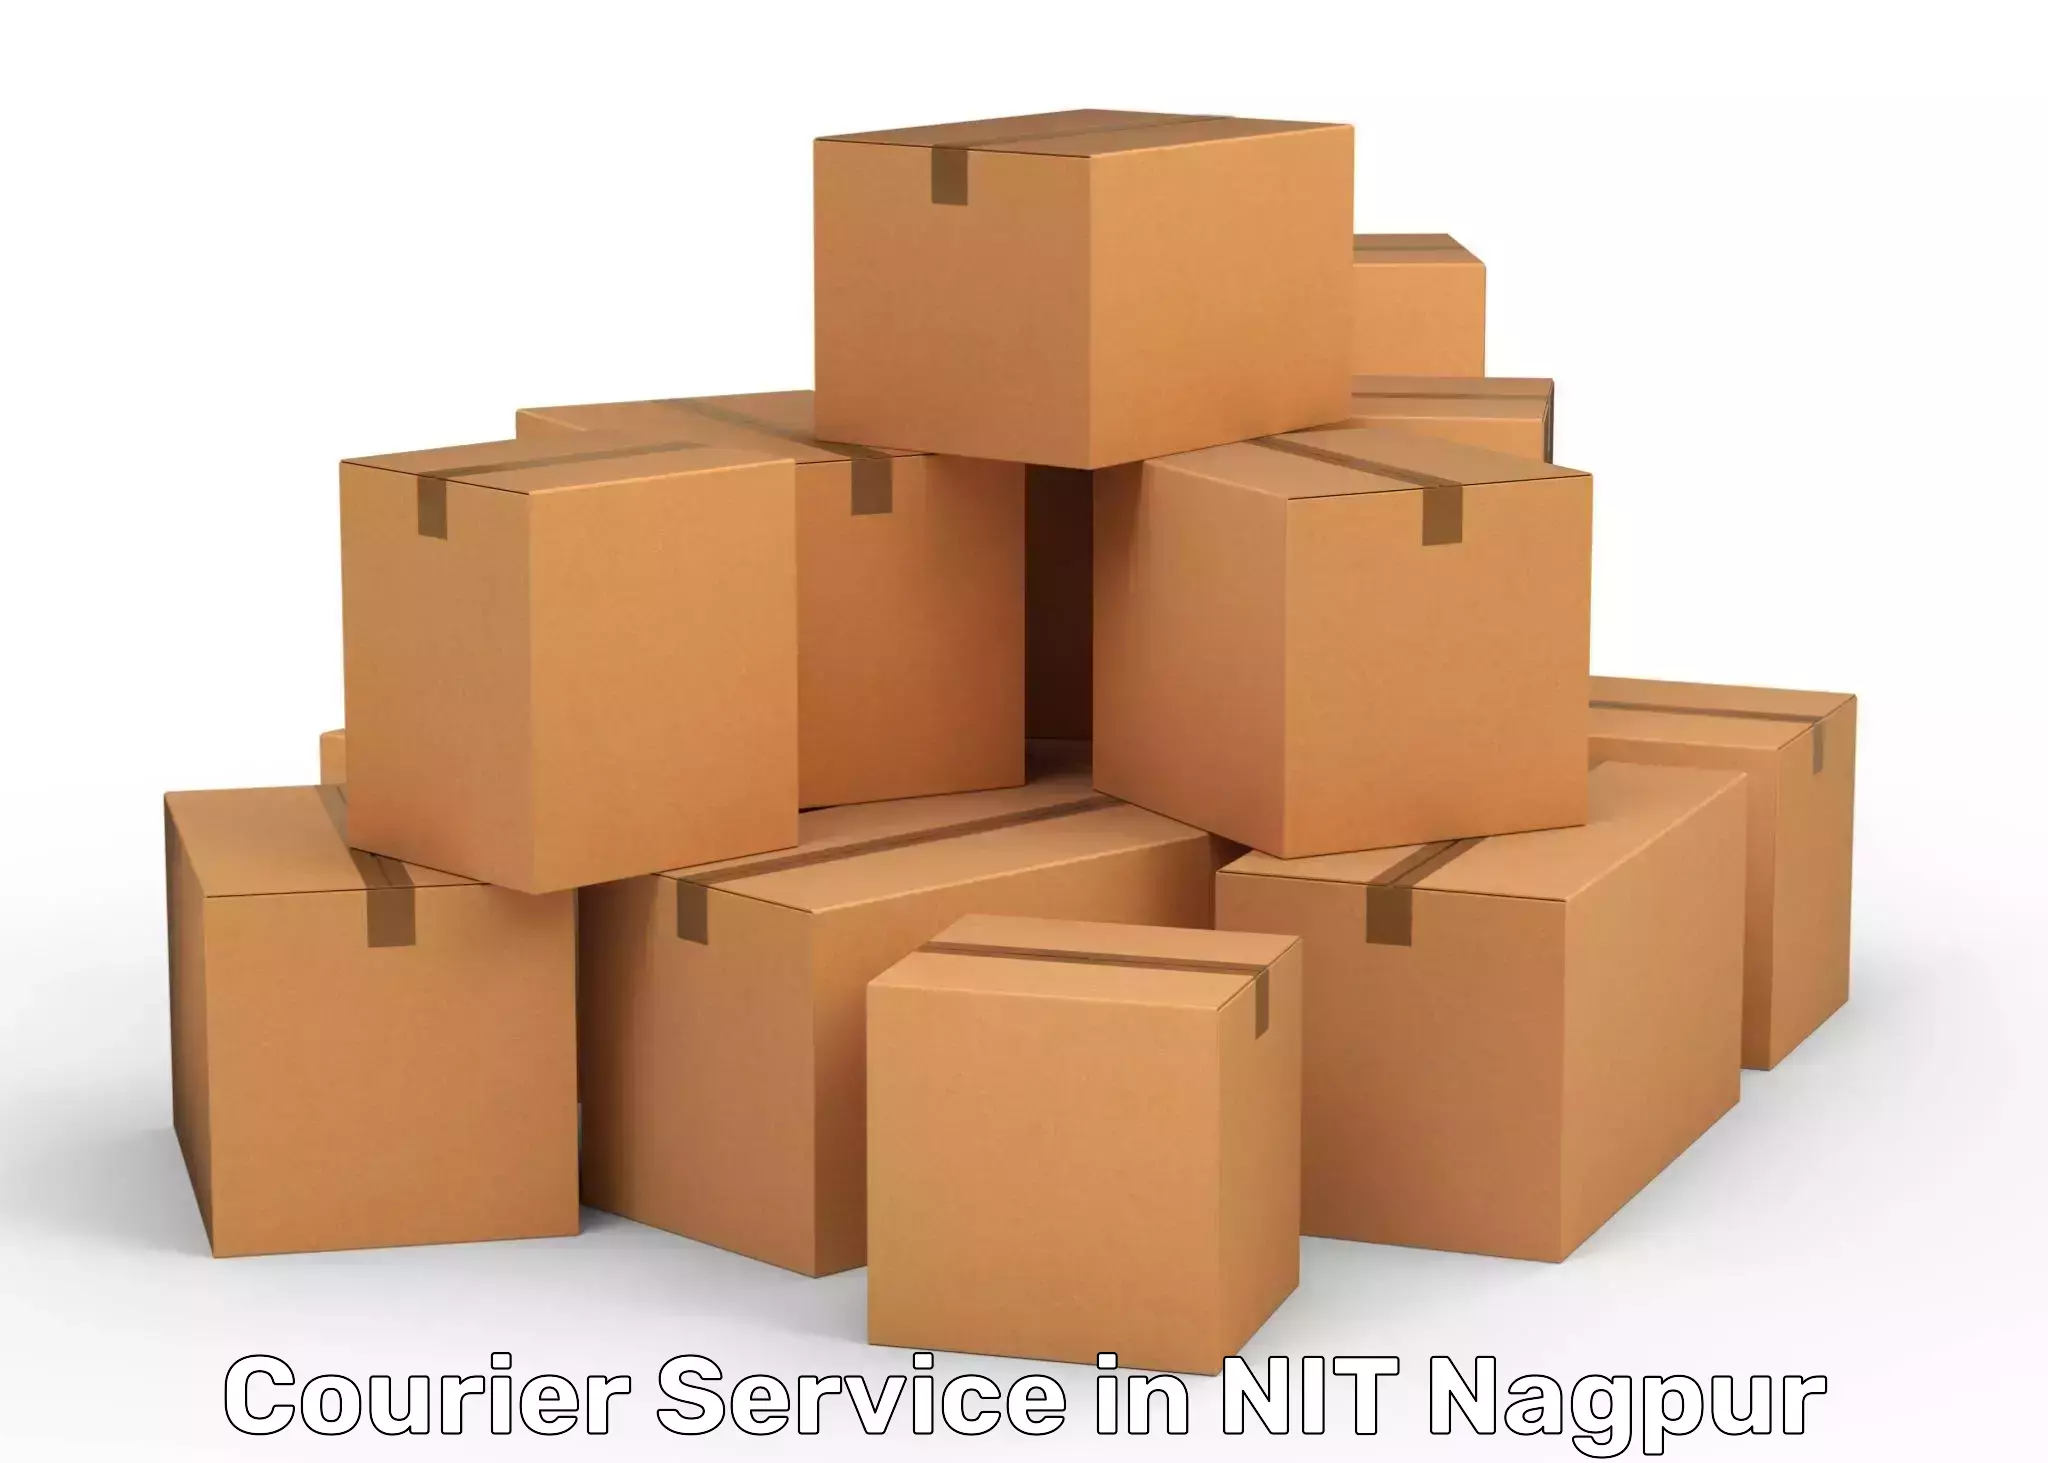 Easy access courier services in NIT Nagpur